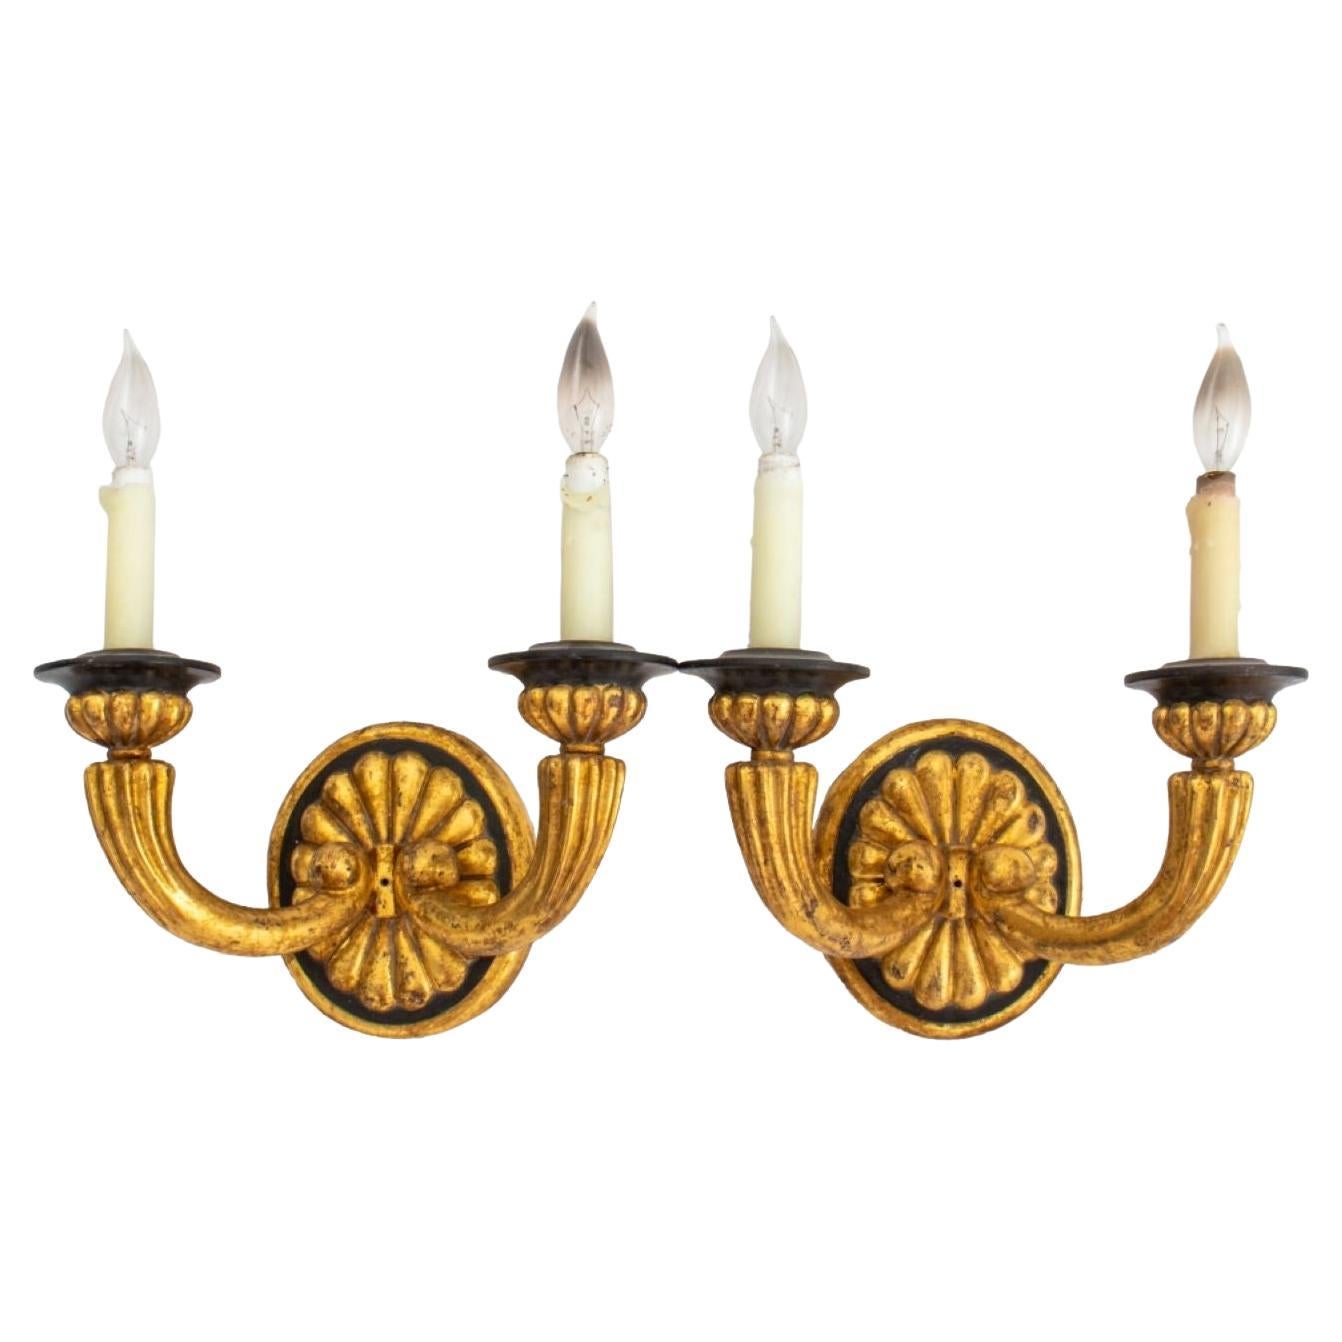 Art Deco Style Giltwood Two Light Sconces